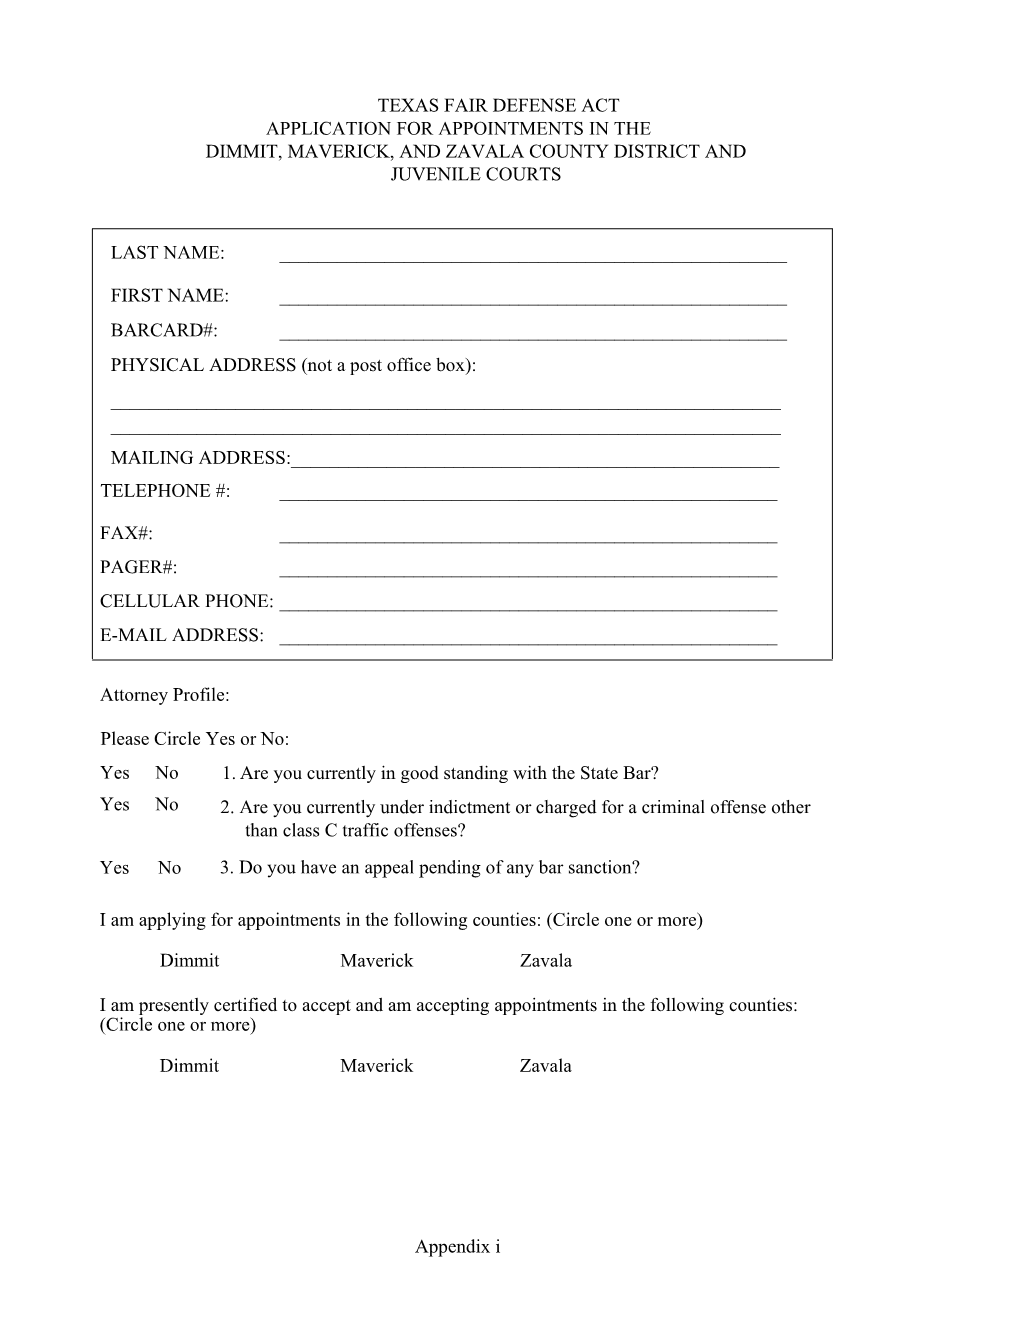 Texas Fair Defense Act Application for Appointments in The